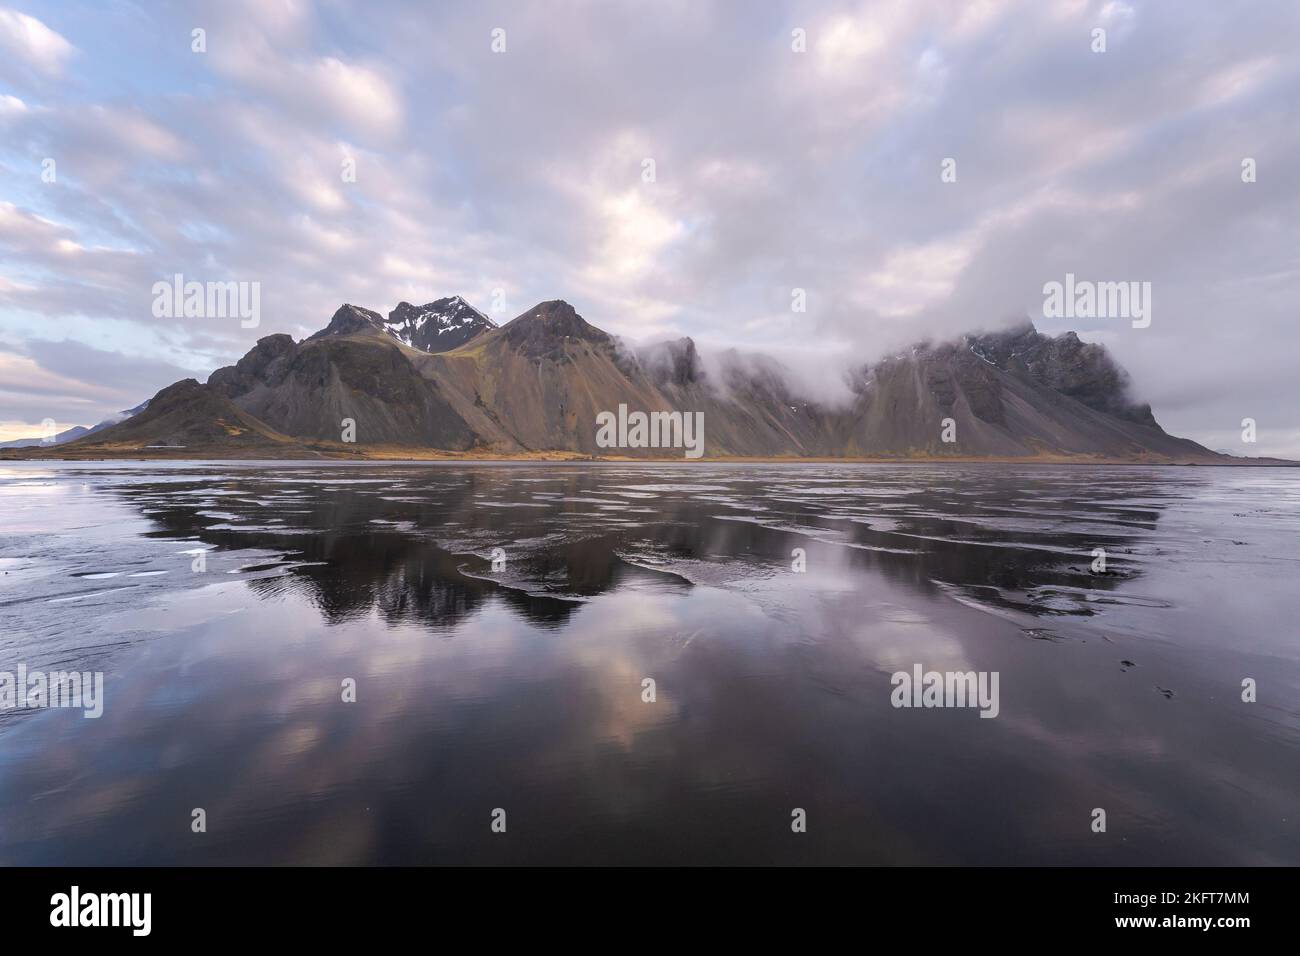 Spectacular Nordic scenery of calm frozen lake near rocky Vestrahorn Mountain with snowy peaks against cloudy sky at Stockness beach, Iceland Stock Photo